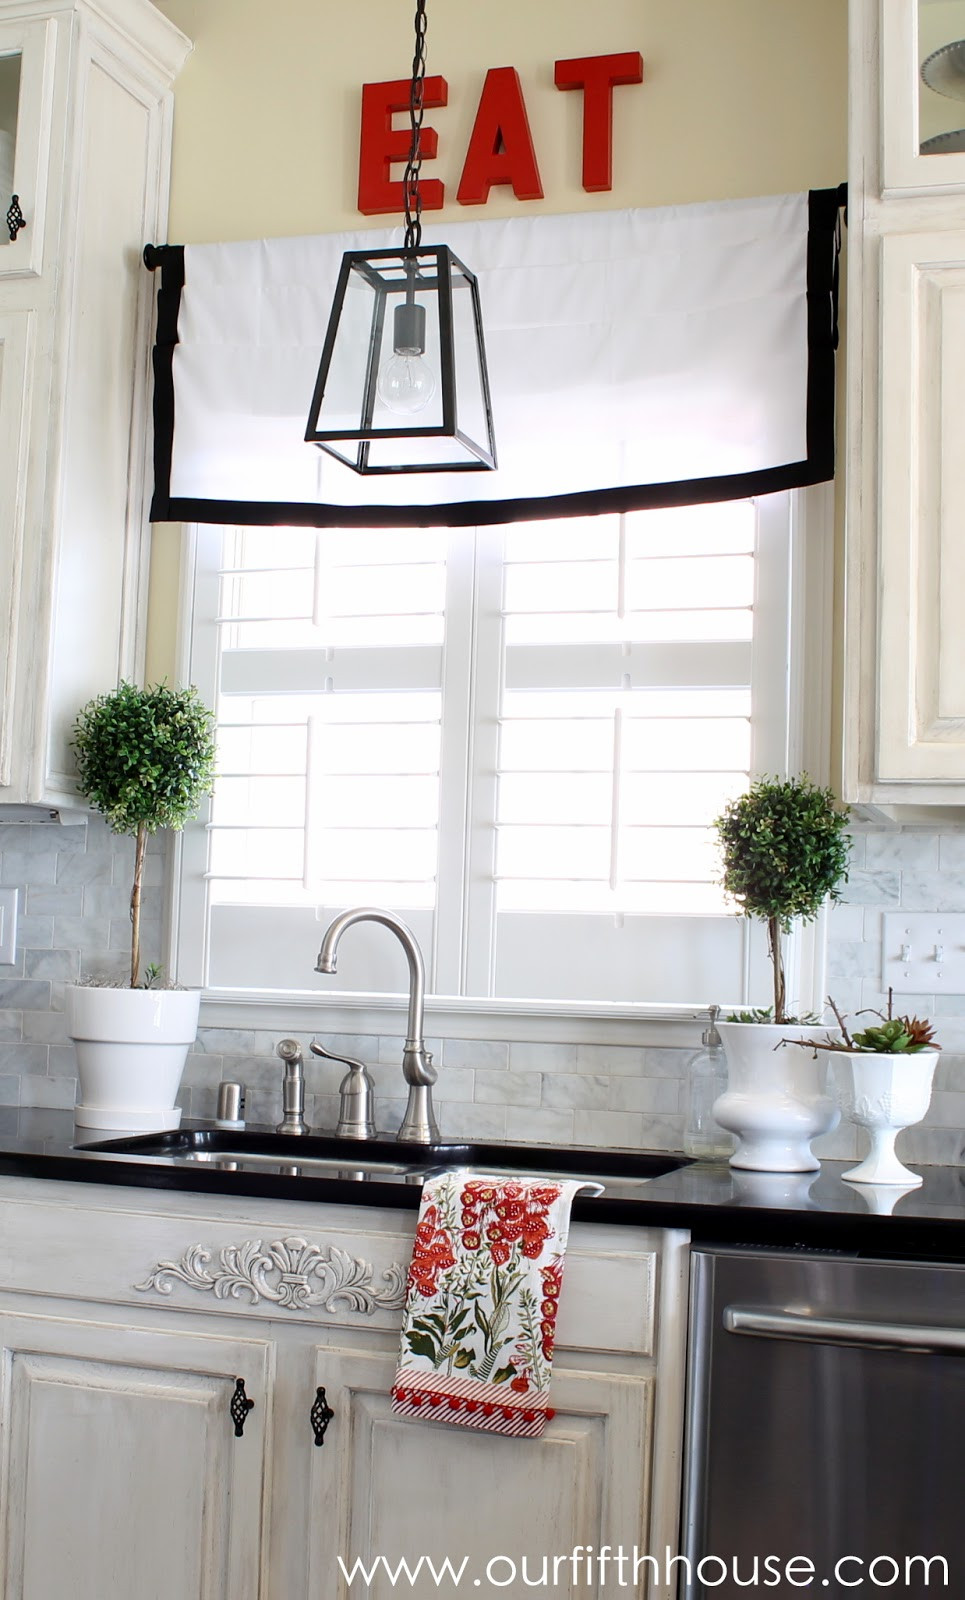 Kitchen Pendant Lighting Over Sink
 New Kitchen Lighting A Lantern Over the Sink Our Fifth